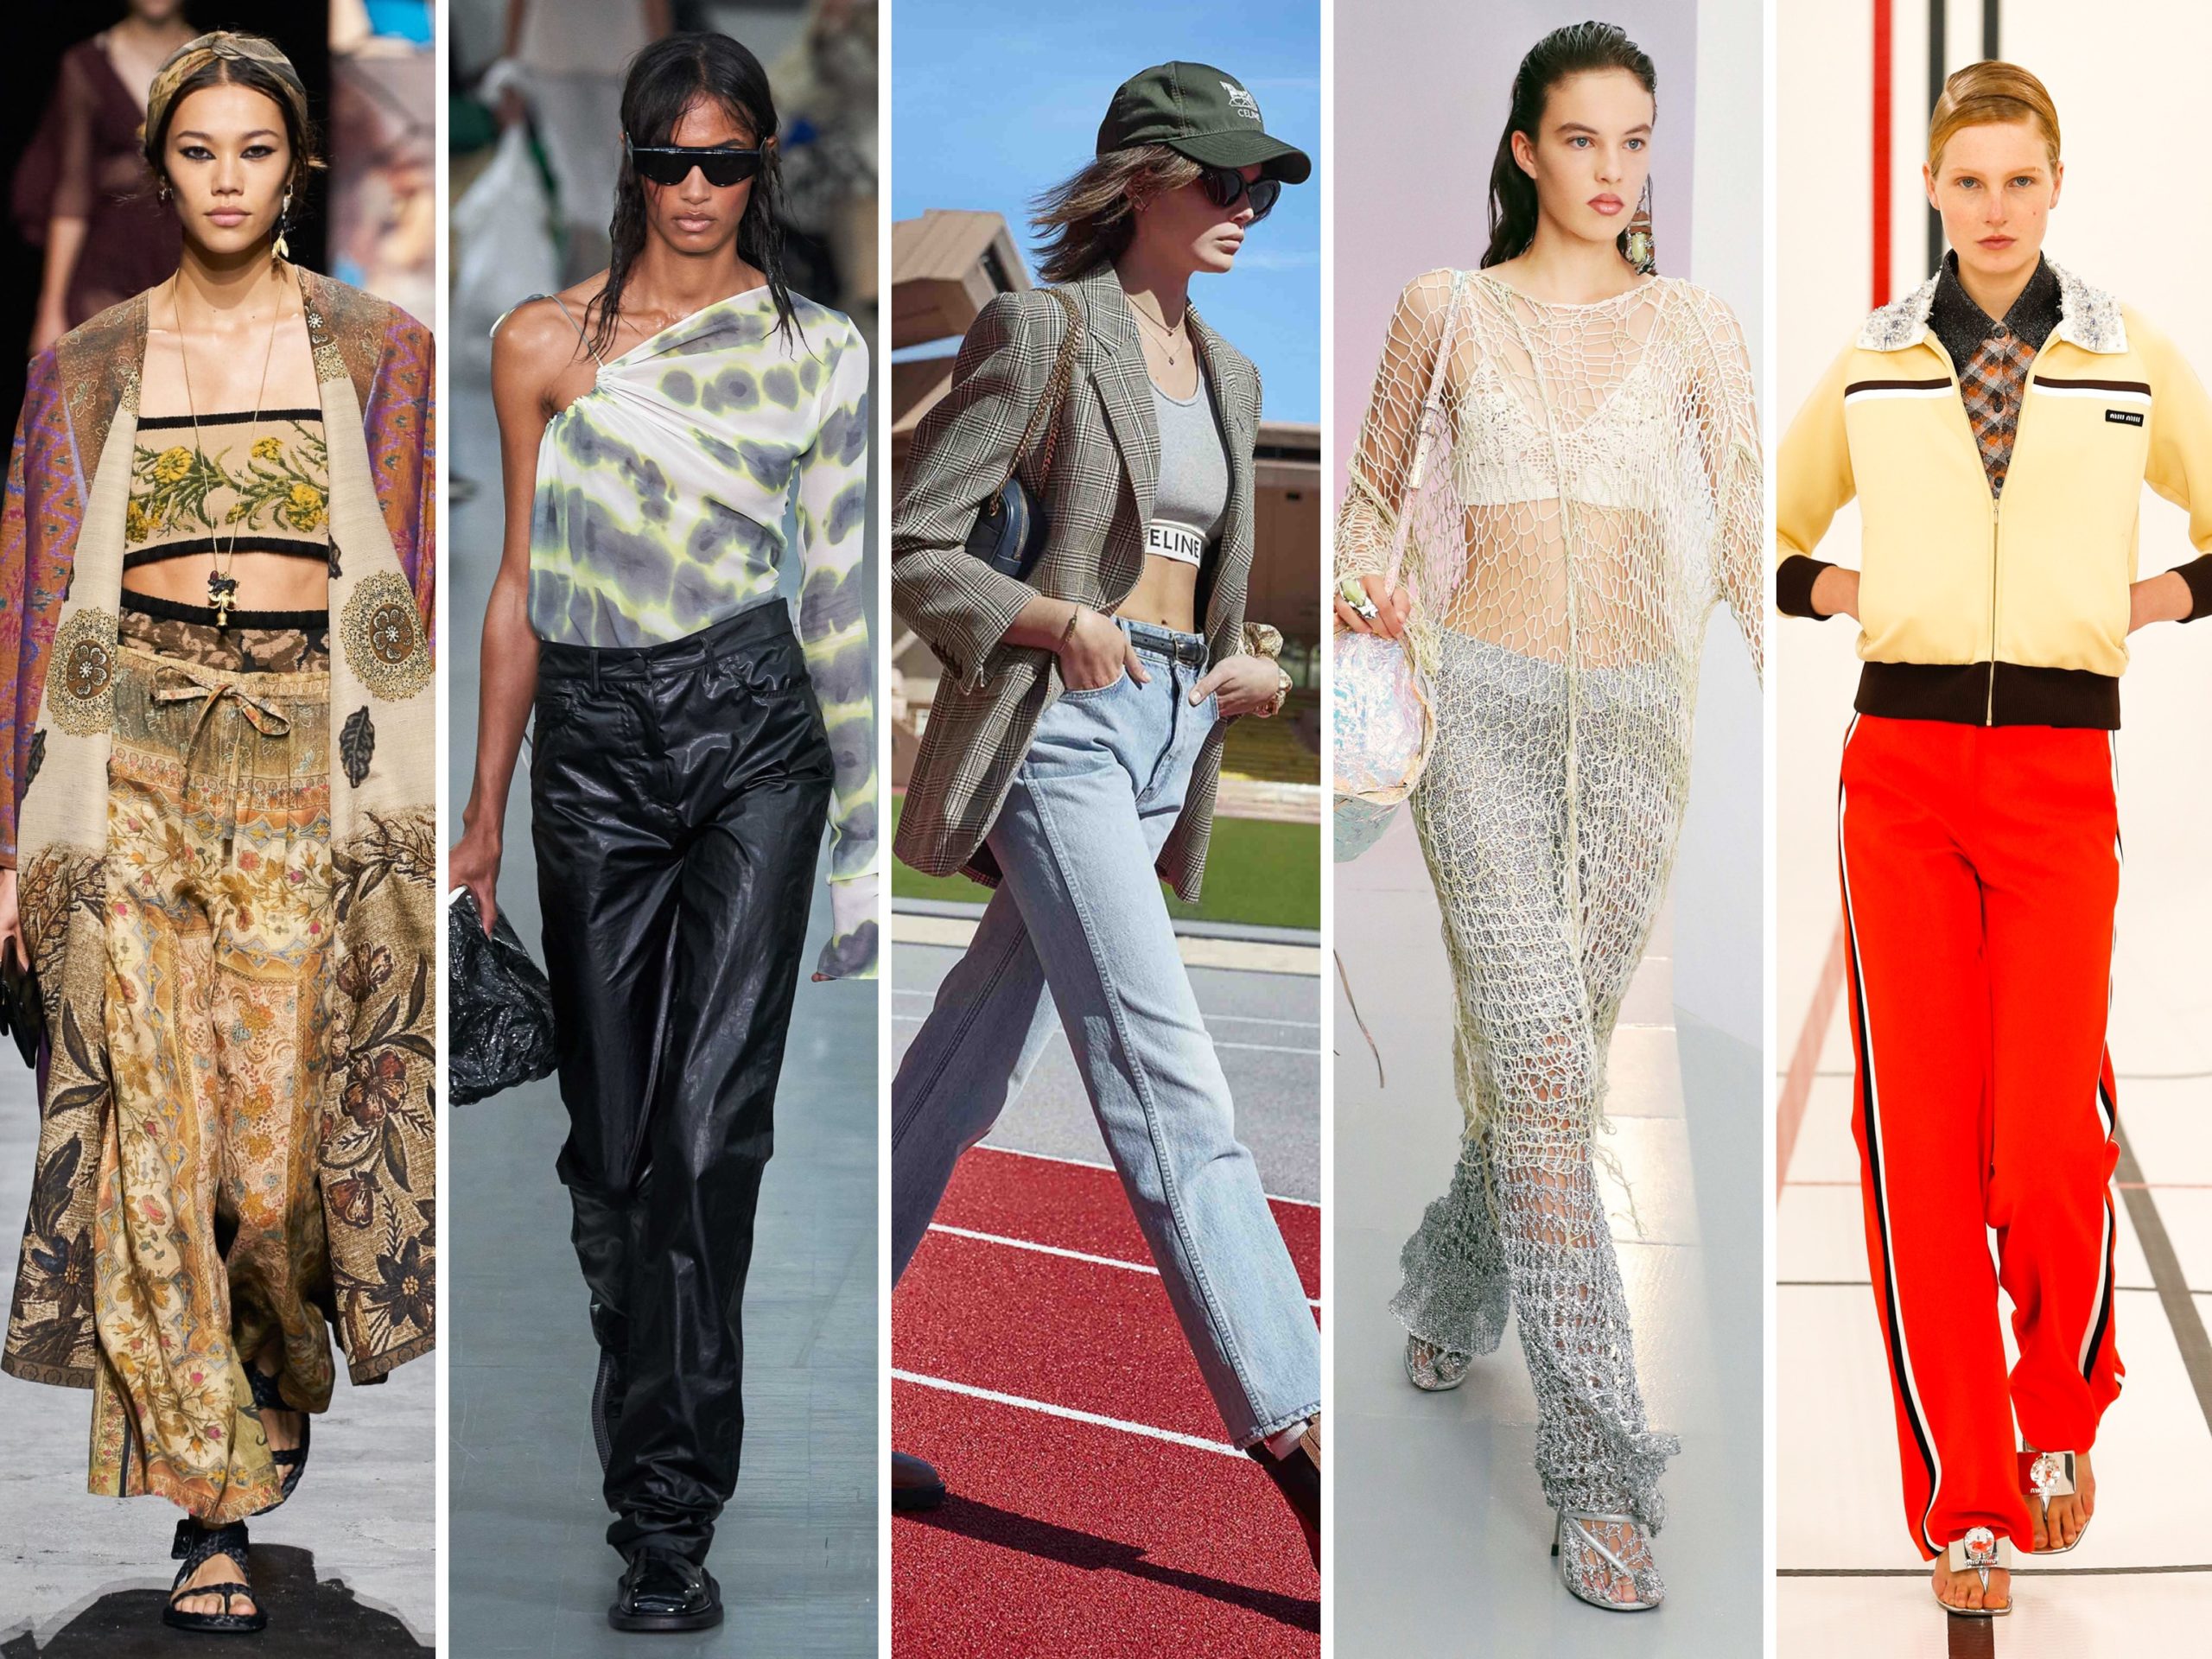 My Top 5 Fashion Trends for Spring Summer 2021 - NKM Styling